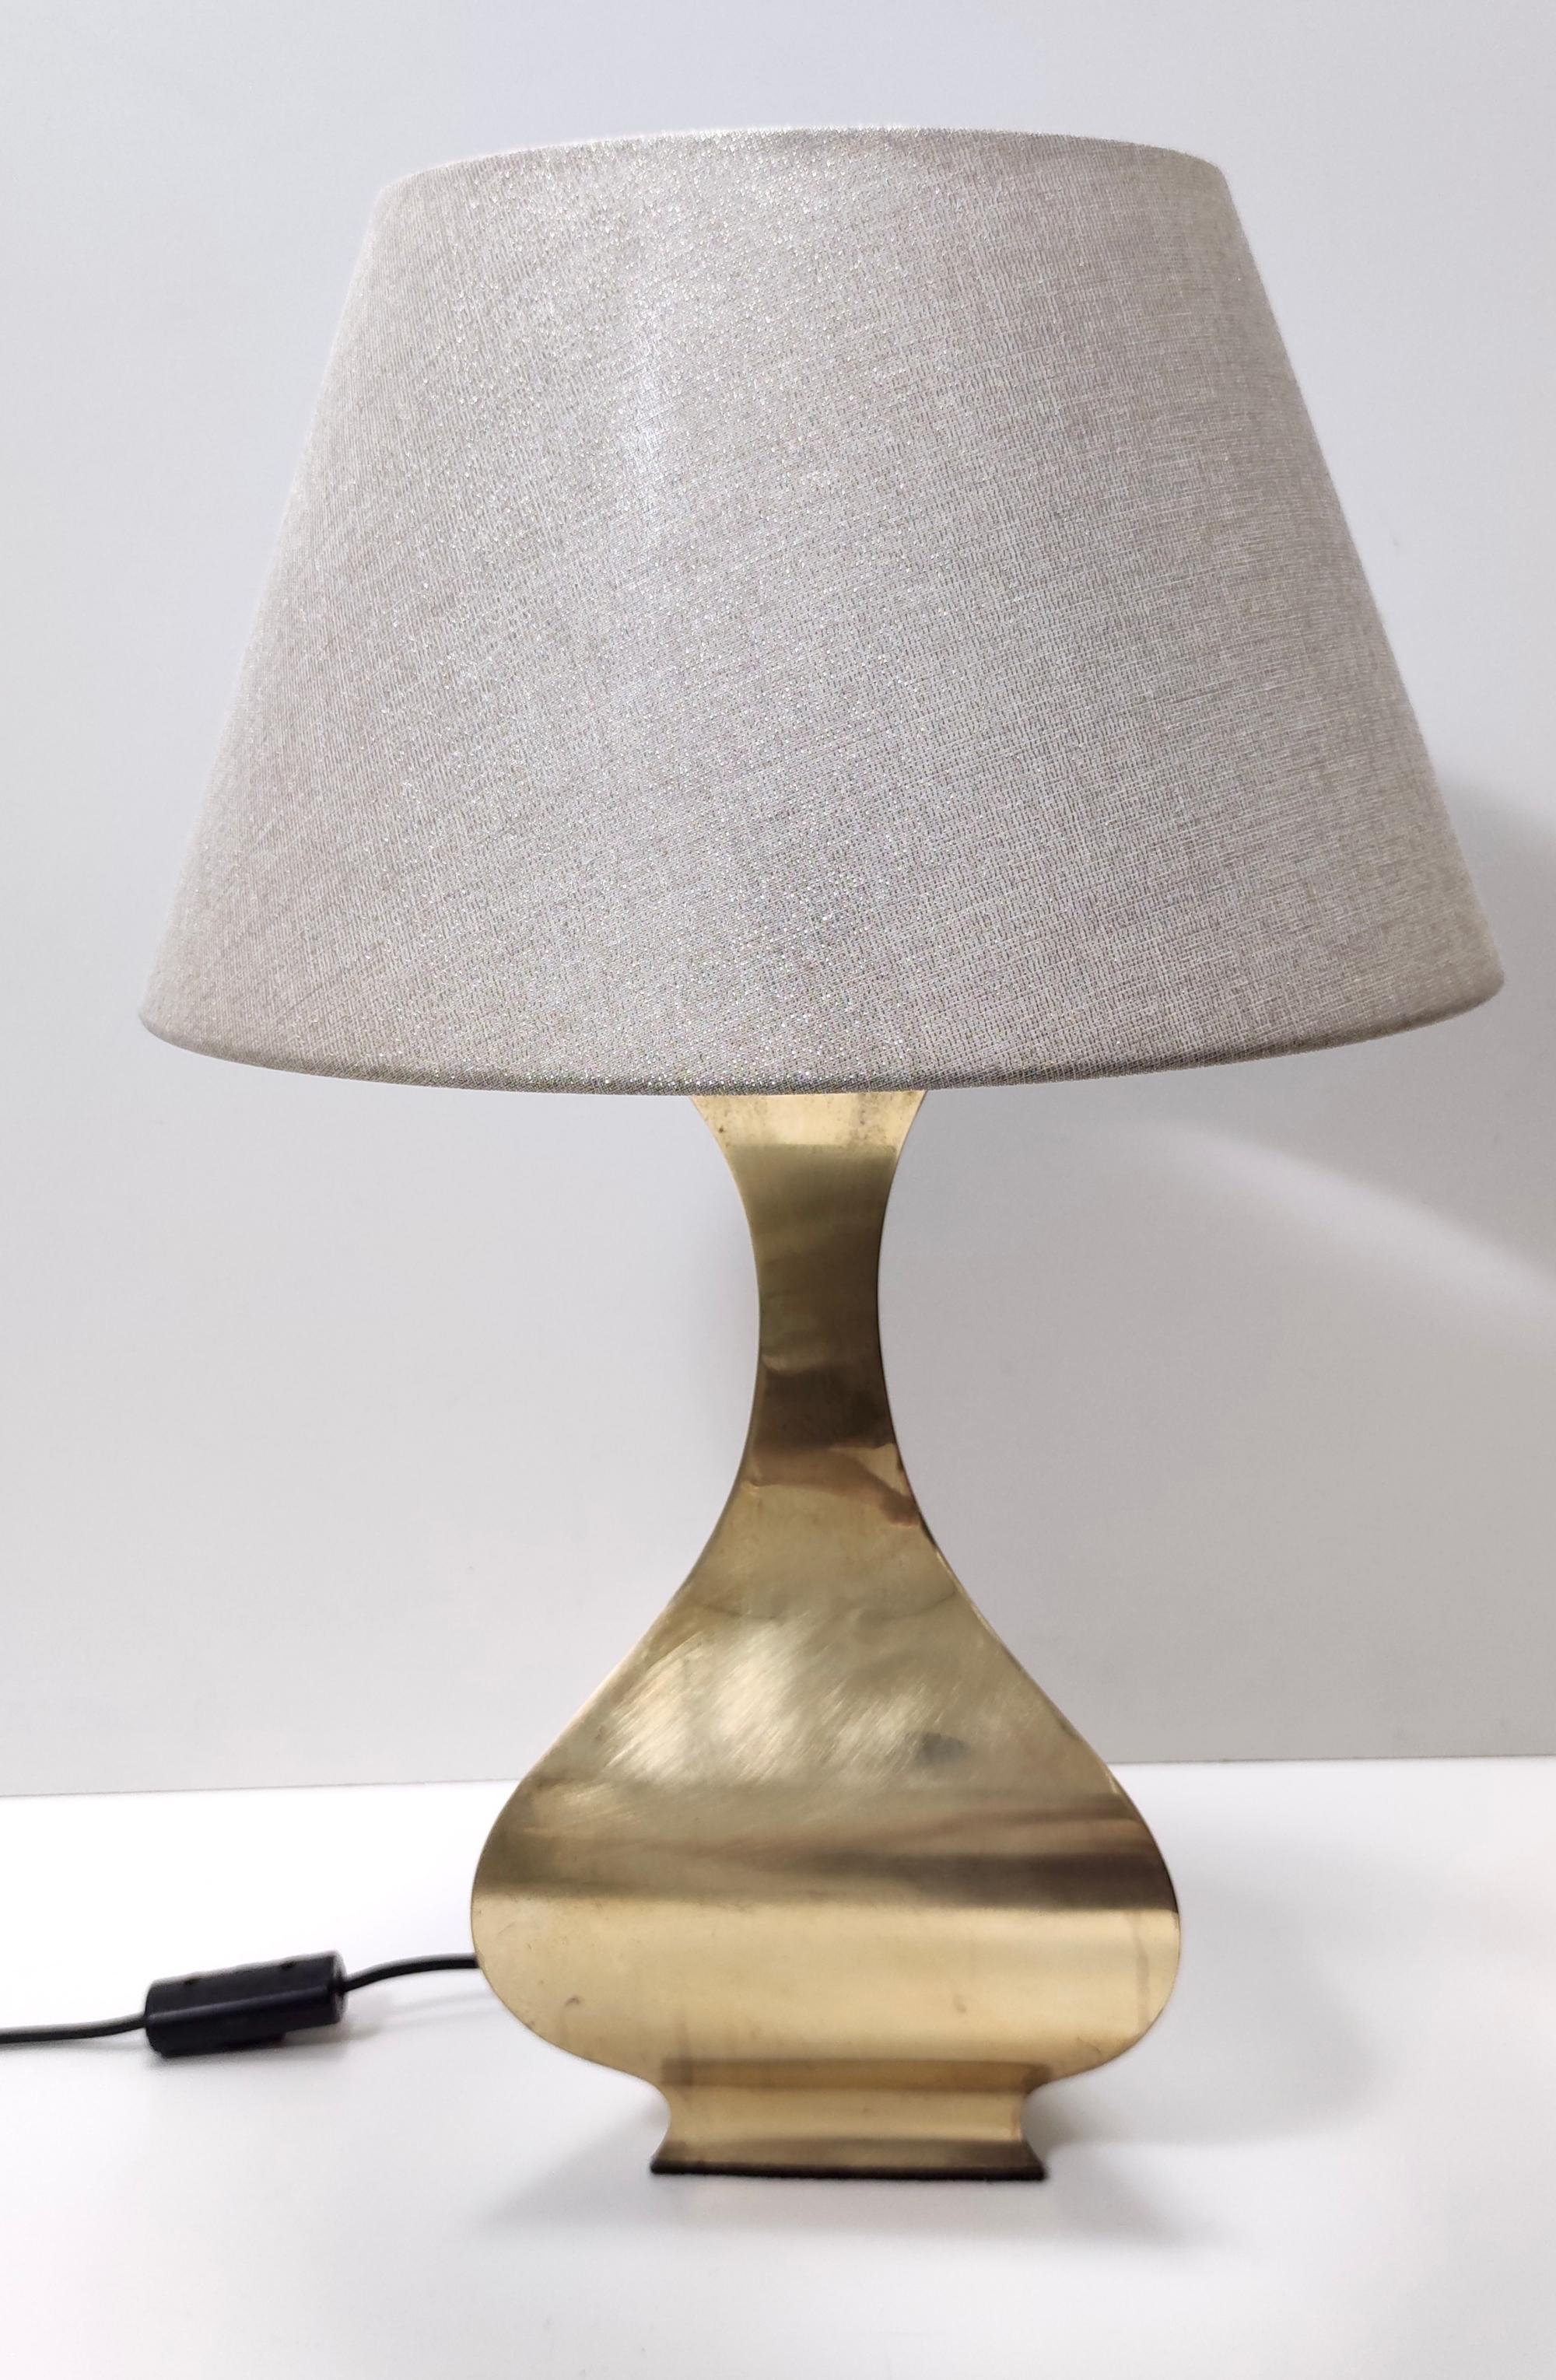 Pair of Postmodern Brass Table Lamps by Montagna Grillo and Tonello, Italy In Excellent Condition For Sale In Bresso, Lombardy